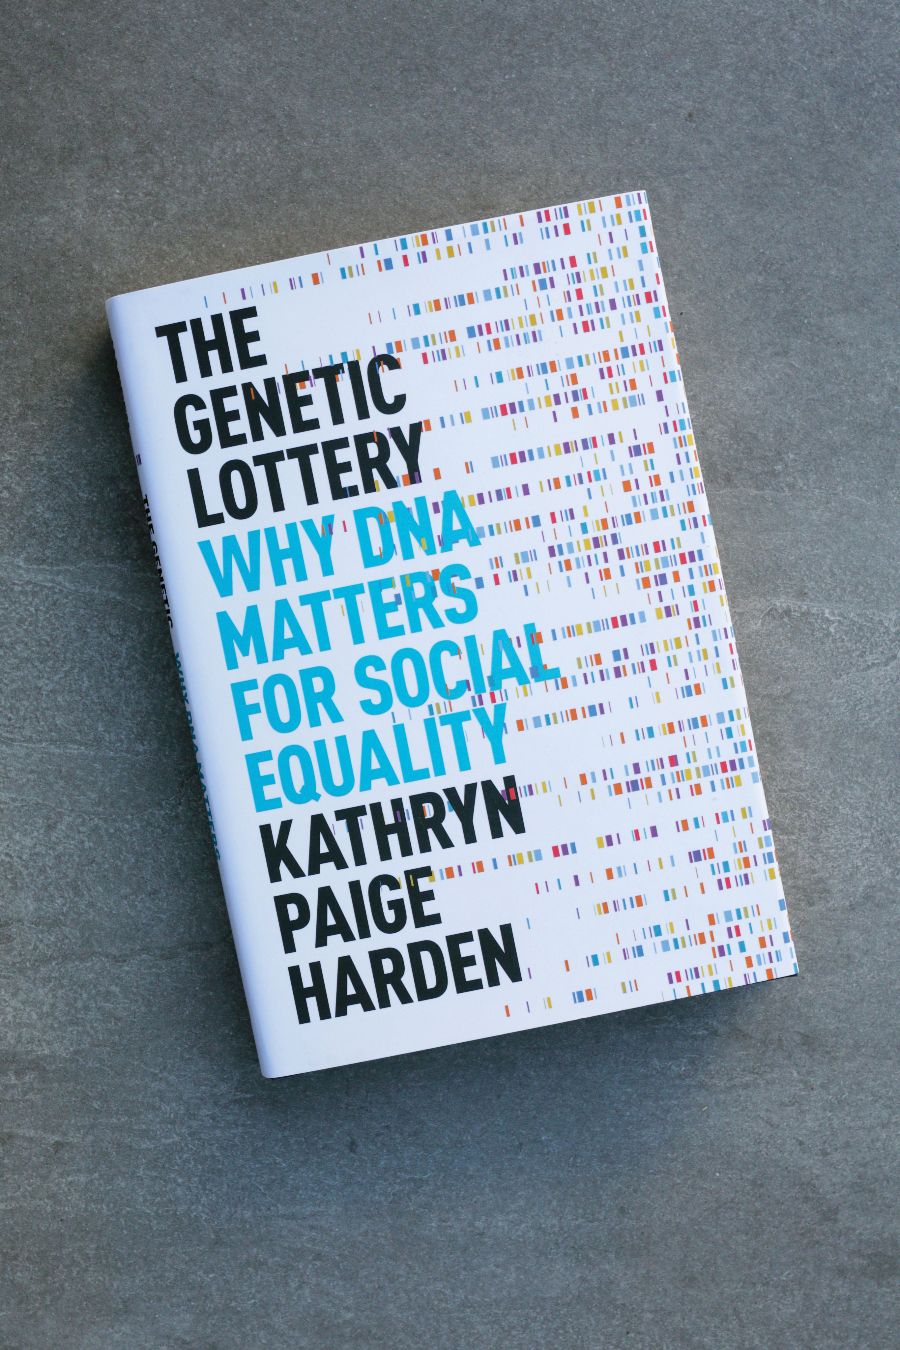 Kathryn Paige Harden: The Genetic Lottery. Why DNA Matters for Social Equality. Princeton University Press, 2021